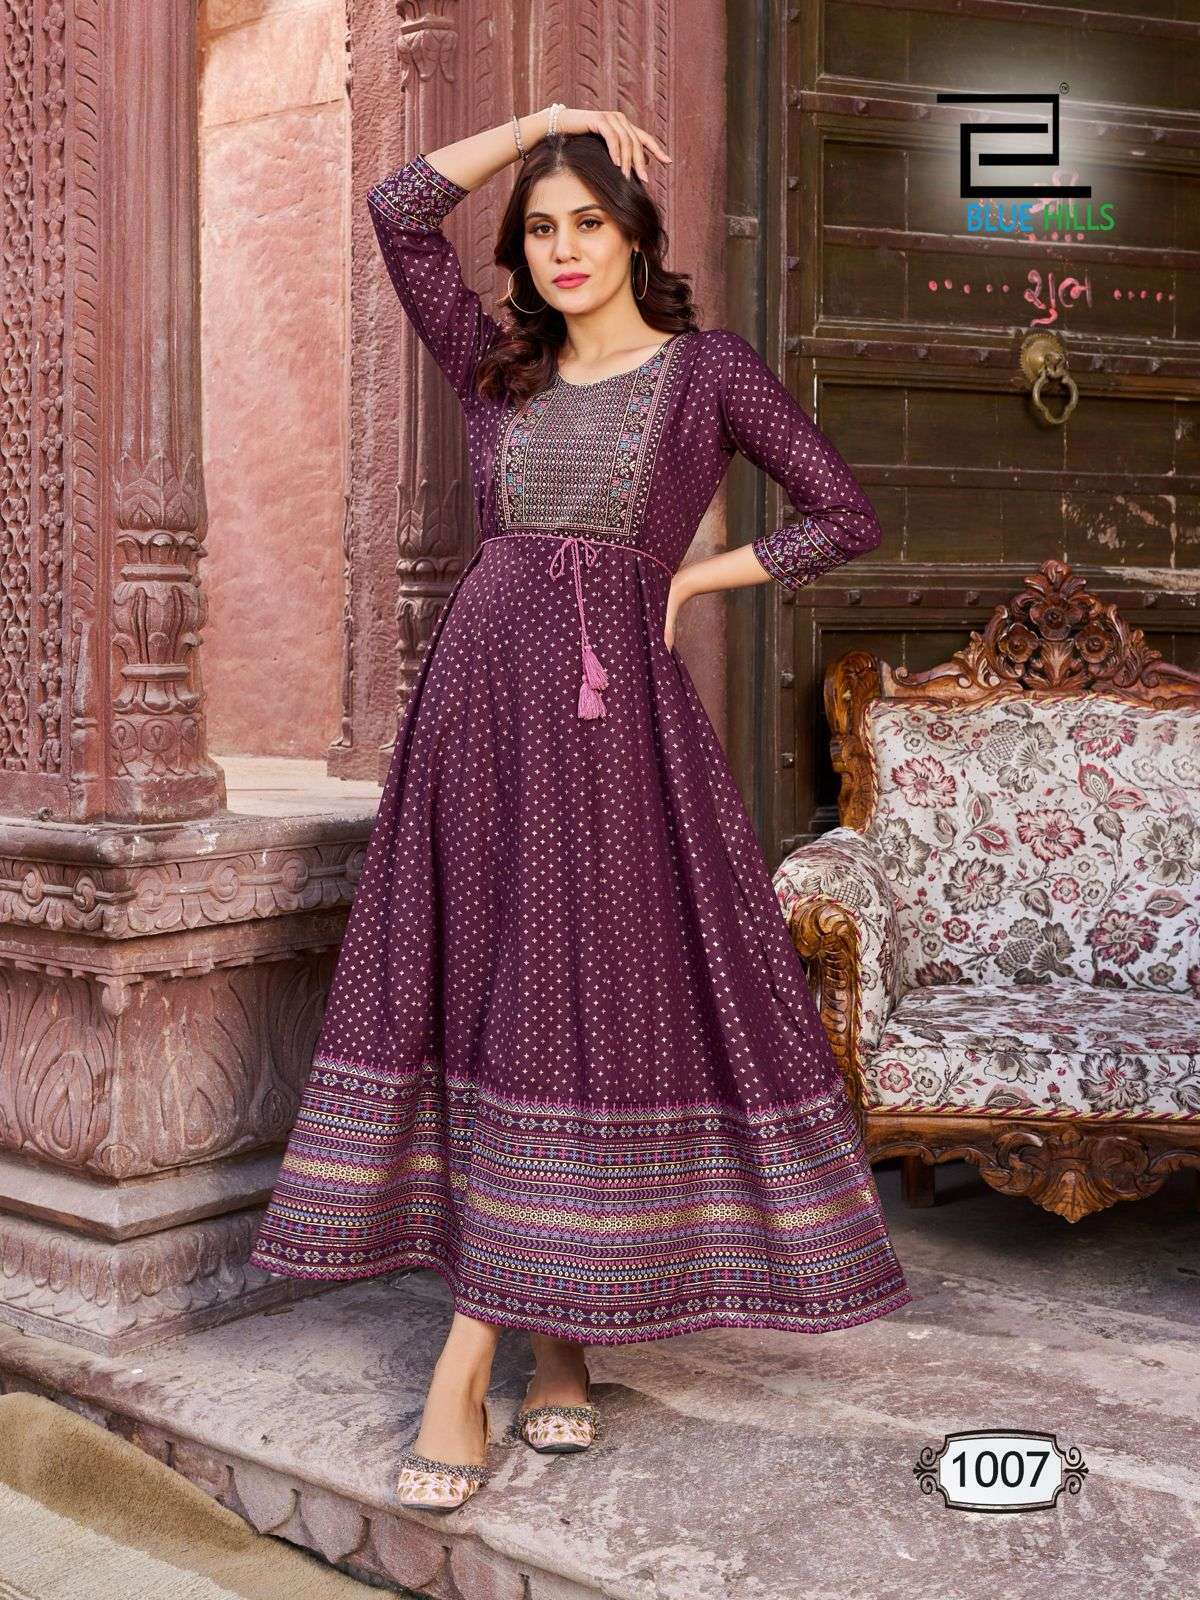 BLUE HILLS GLAMOURS Kurti Wholesale price in india